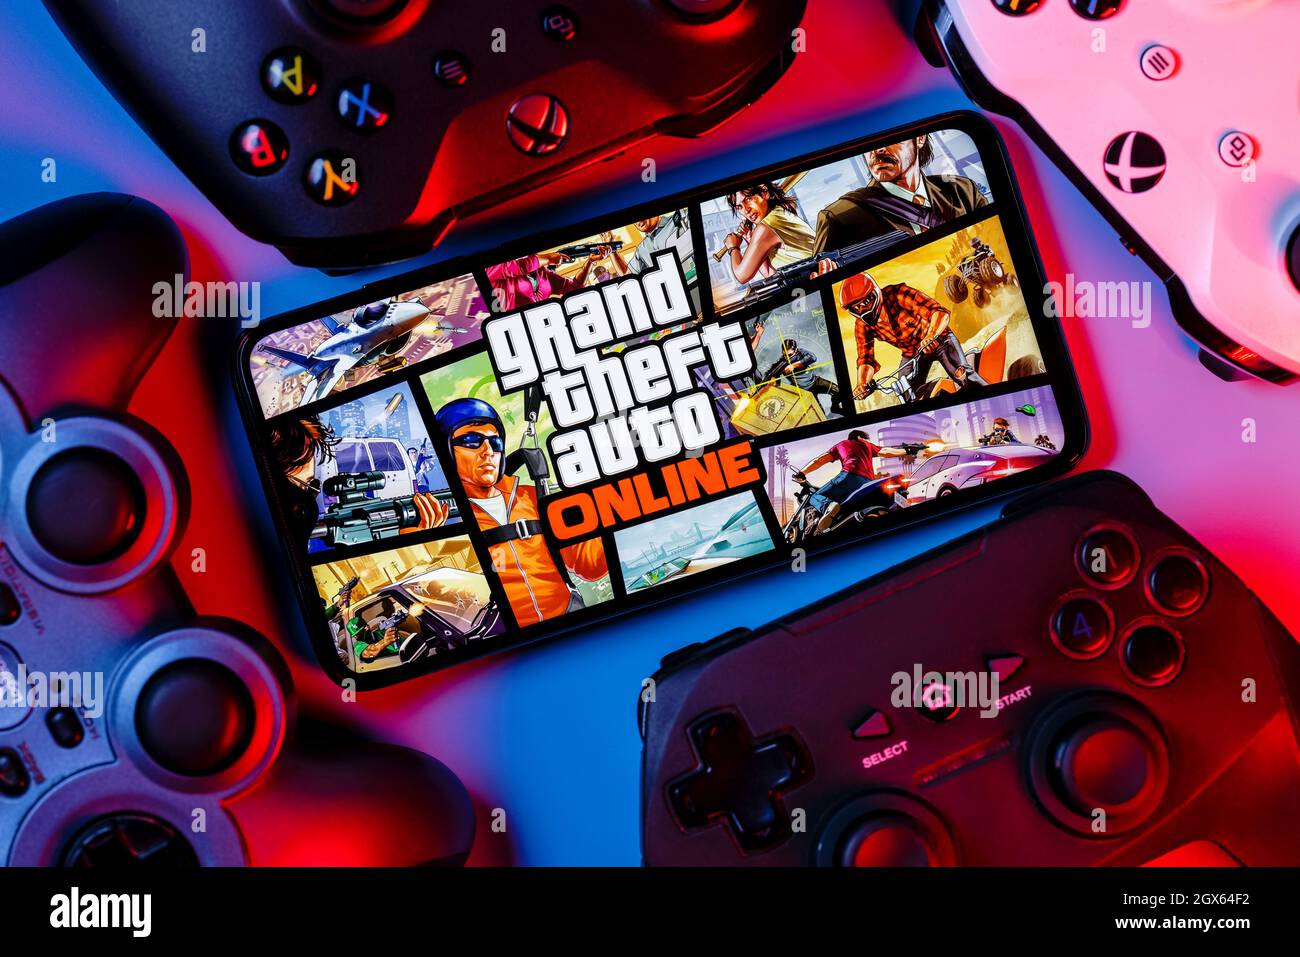 A smartphone with the frame from GTA Online on the screen surrounded by gamepads. Stock Photo